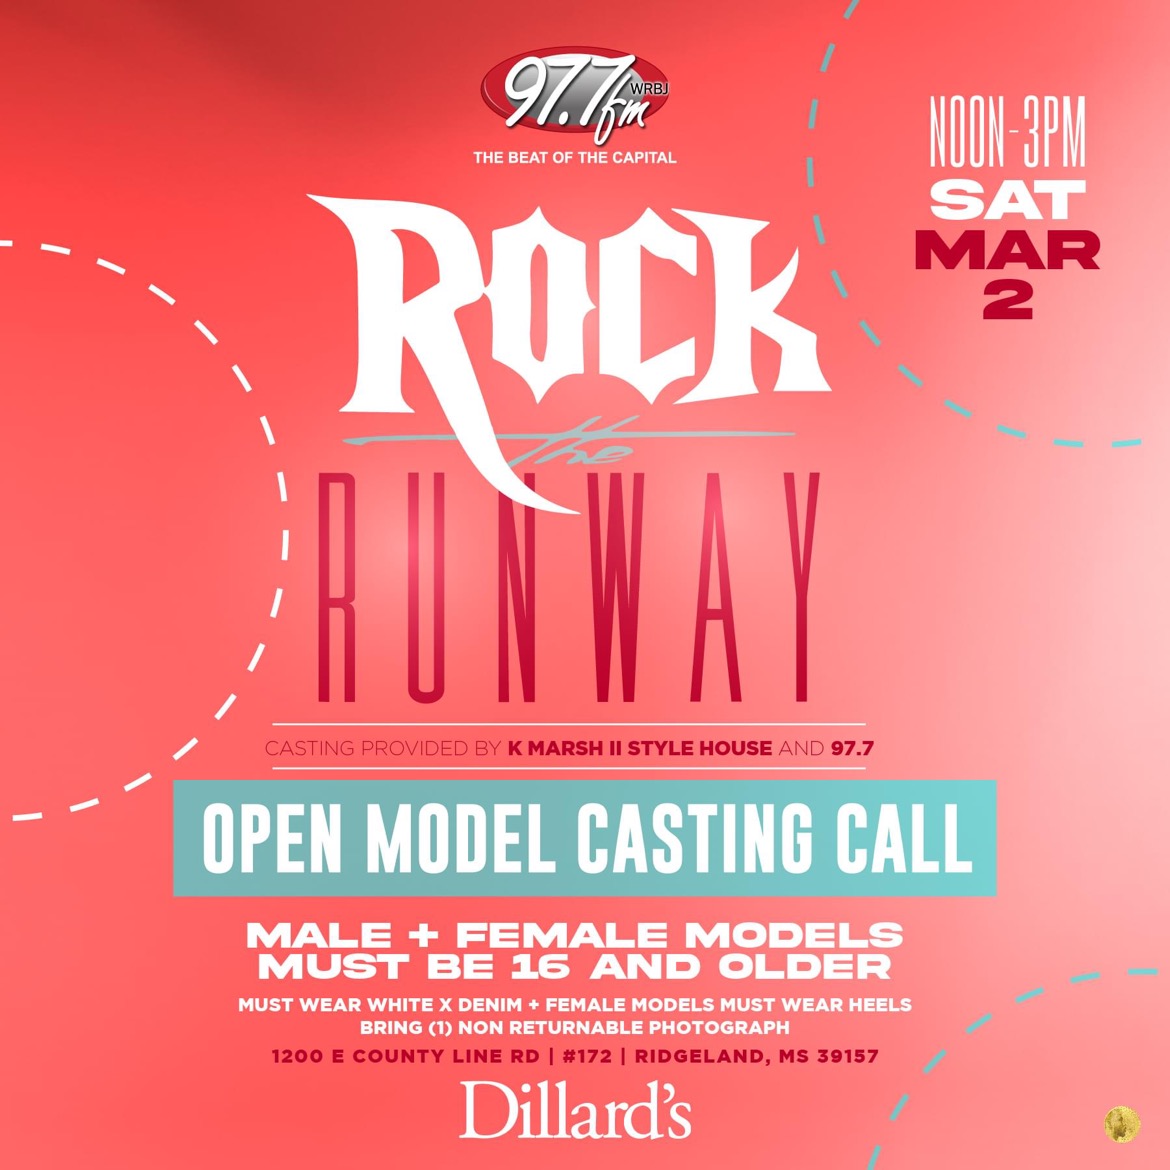 Jackson, MS! The official Open Model Casting Call for 97.7's Rock the Runway is this Saturday March 2nd at Dillard's Northpark from 12 Noon -3pm. Female & male models welcomed! Please bring one non-returnable photograph of yourself. #JacksonMS #977RocktheRunway #ModelCastingCall